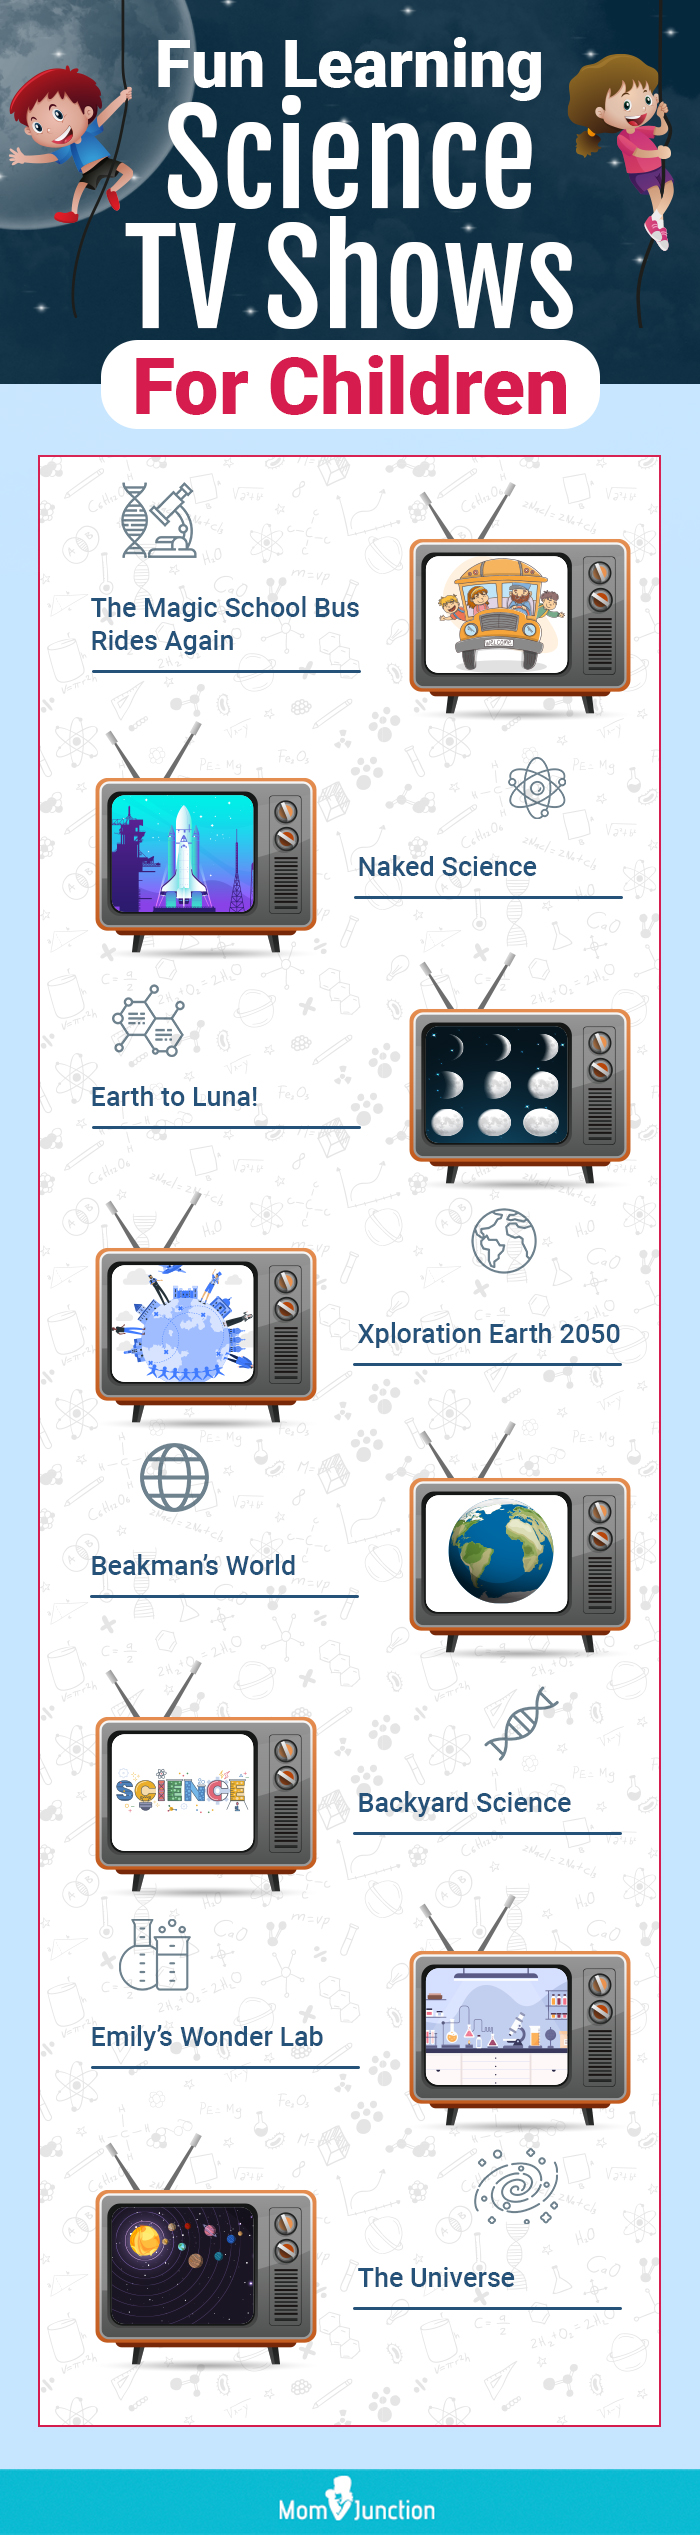 science tv shows for children (infographic)